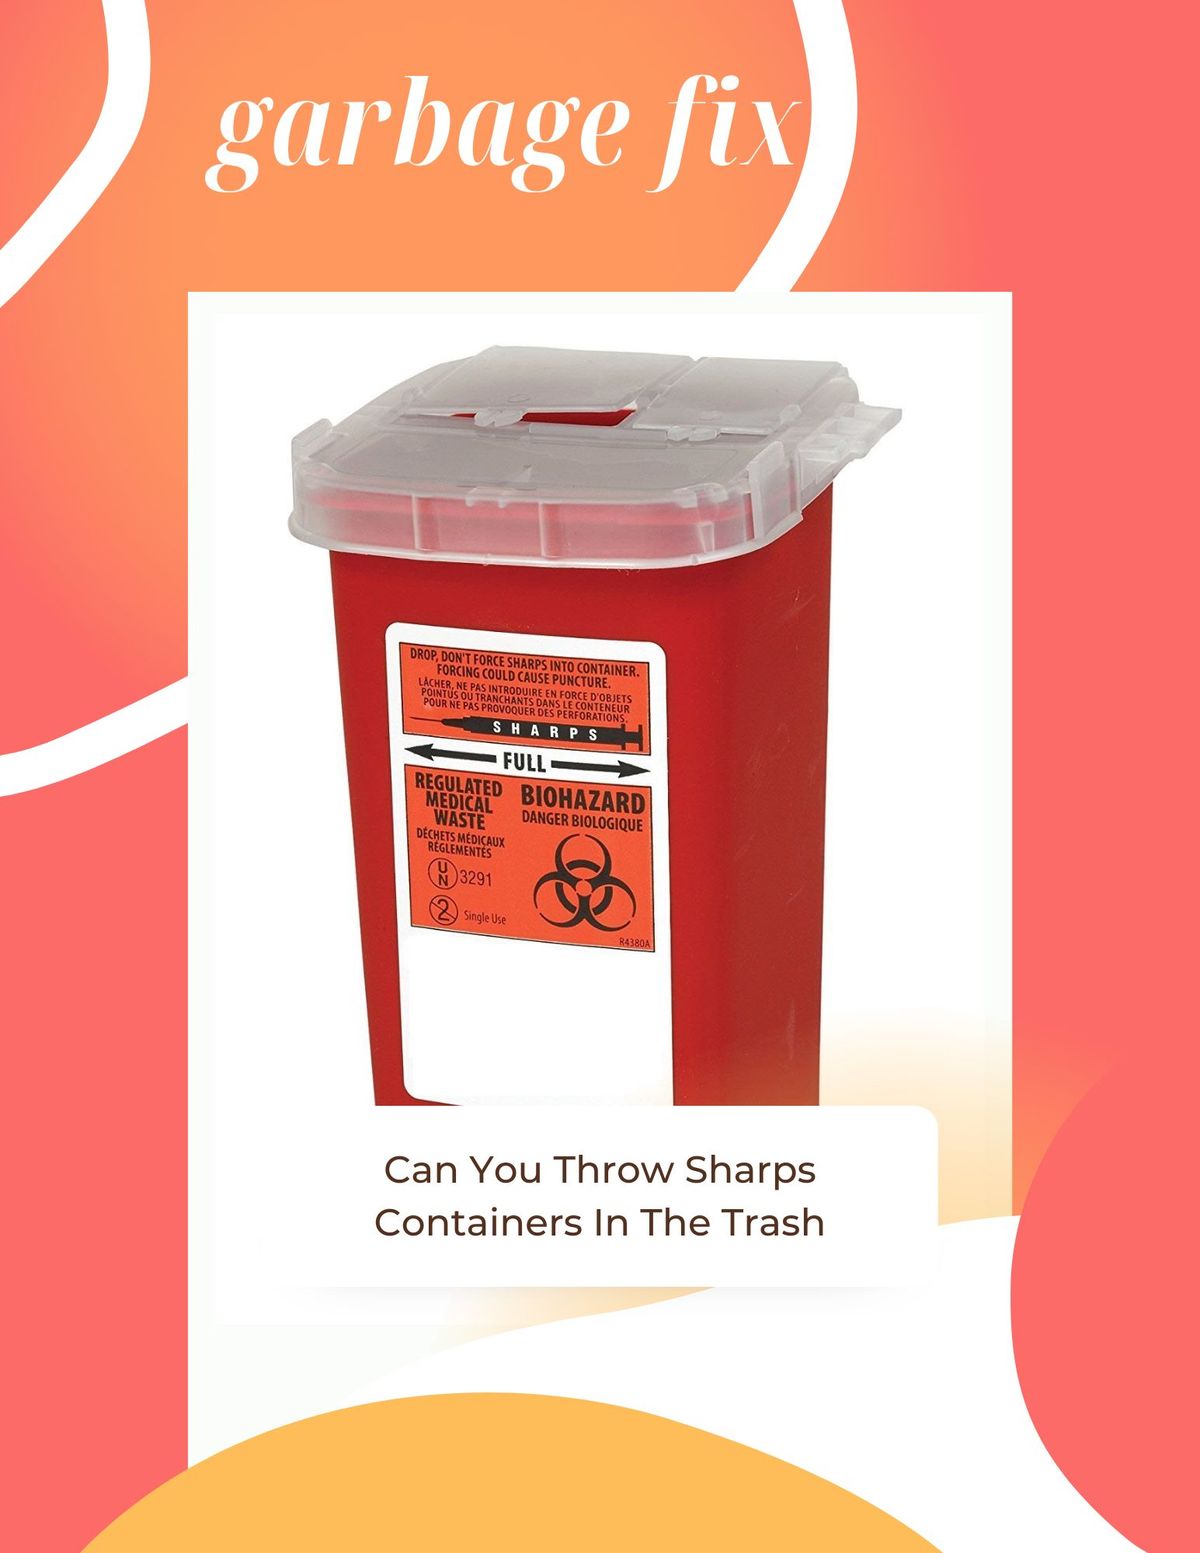 Can You Throw Sharps Containers In The Trash